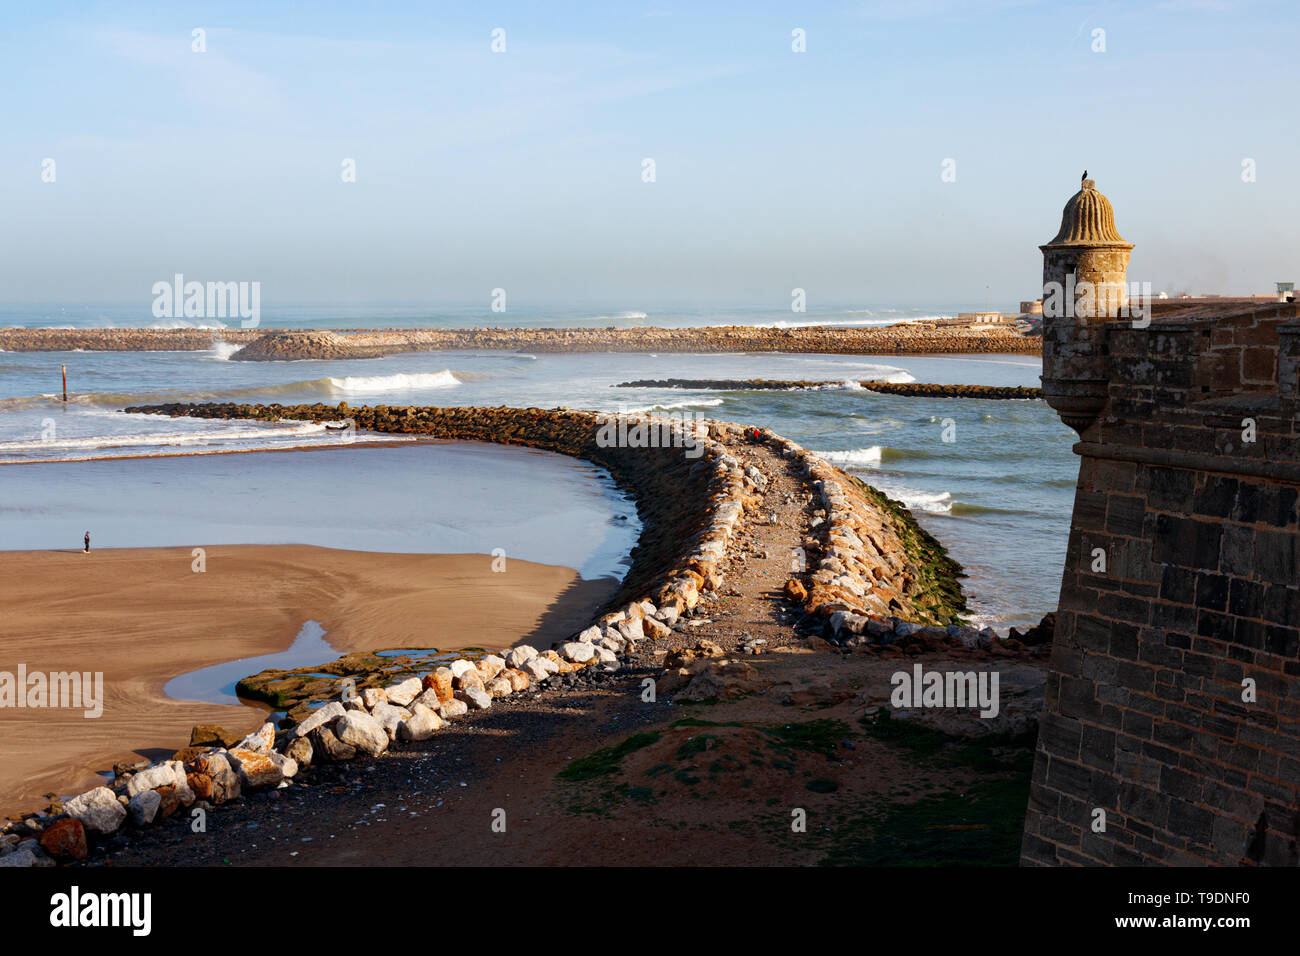 Medieval wall with small turret of Kasbah of the Udayas and an view breakwaters that separate the Bou Regreg river mouth from the Atlantic Ocean. Stock Photo